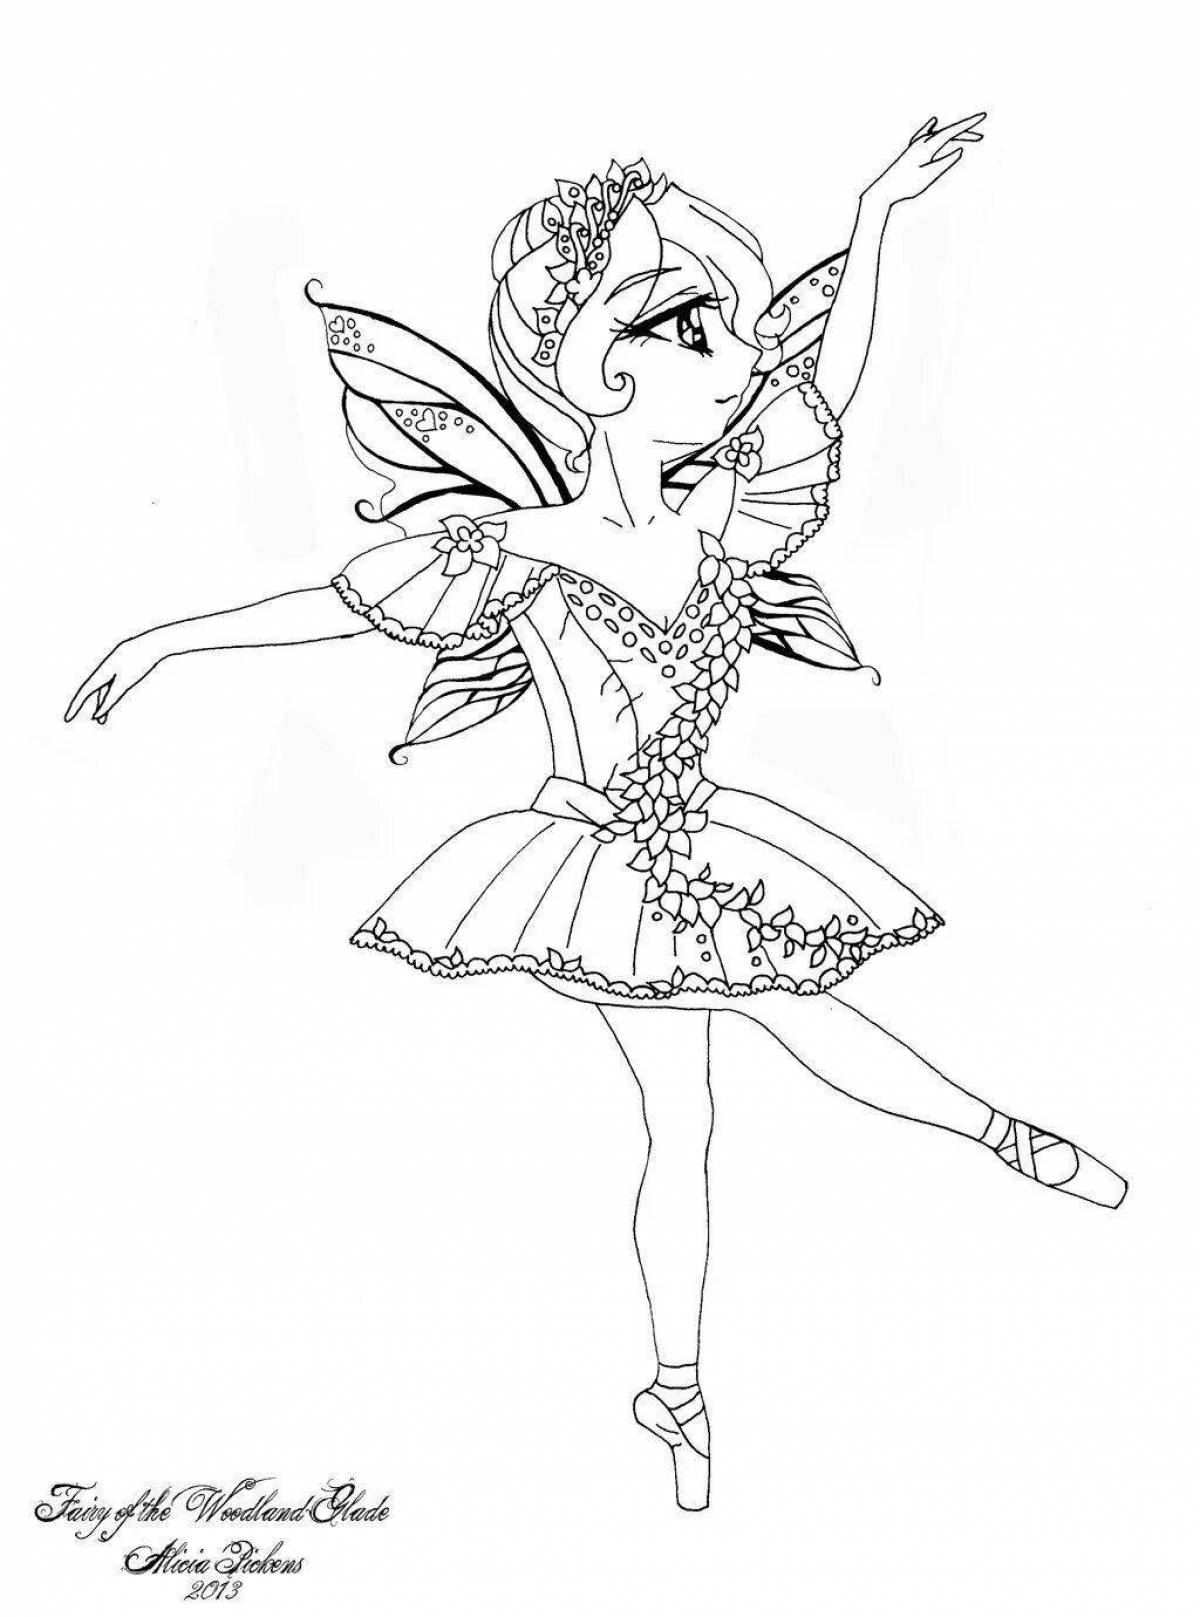 Coloring page graceful cat ballerina